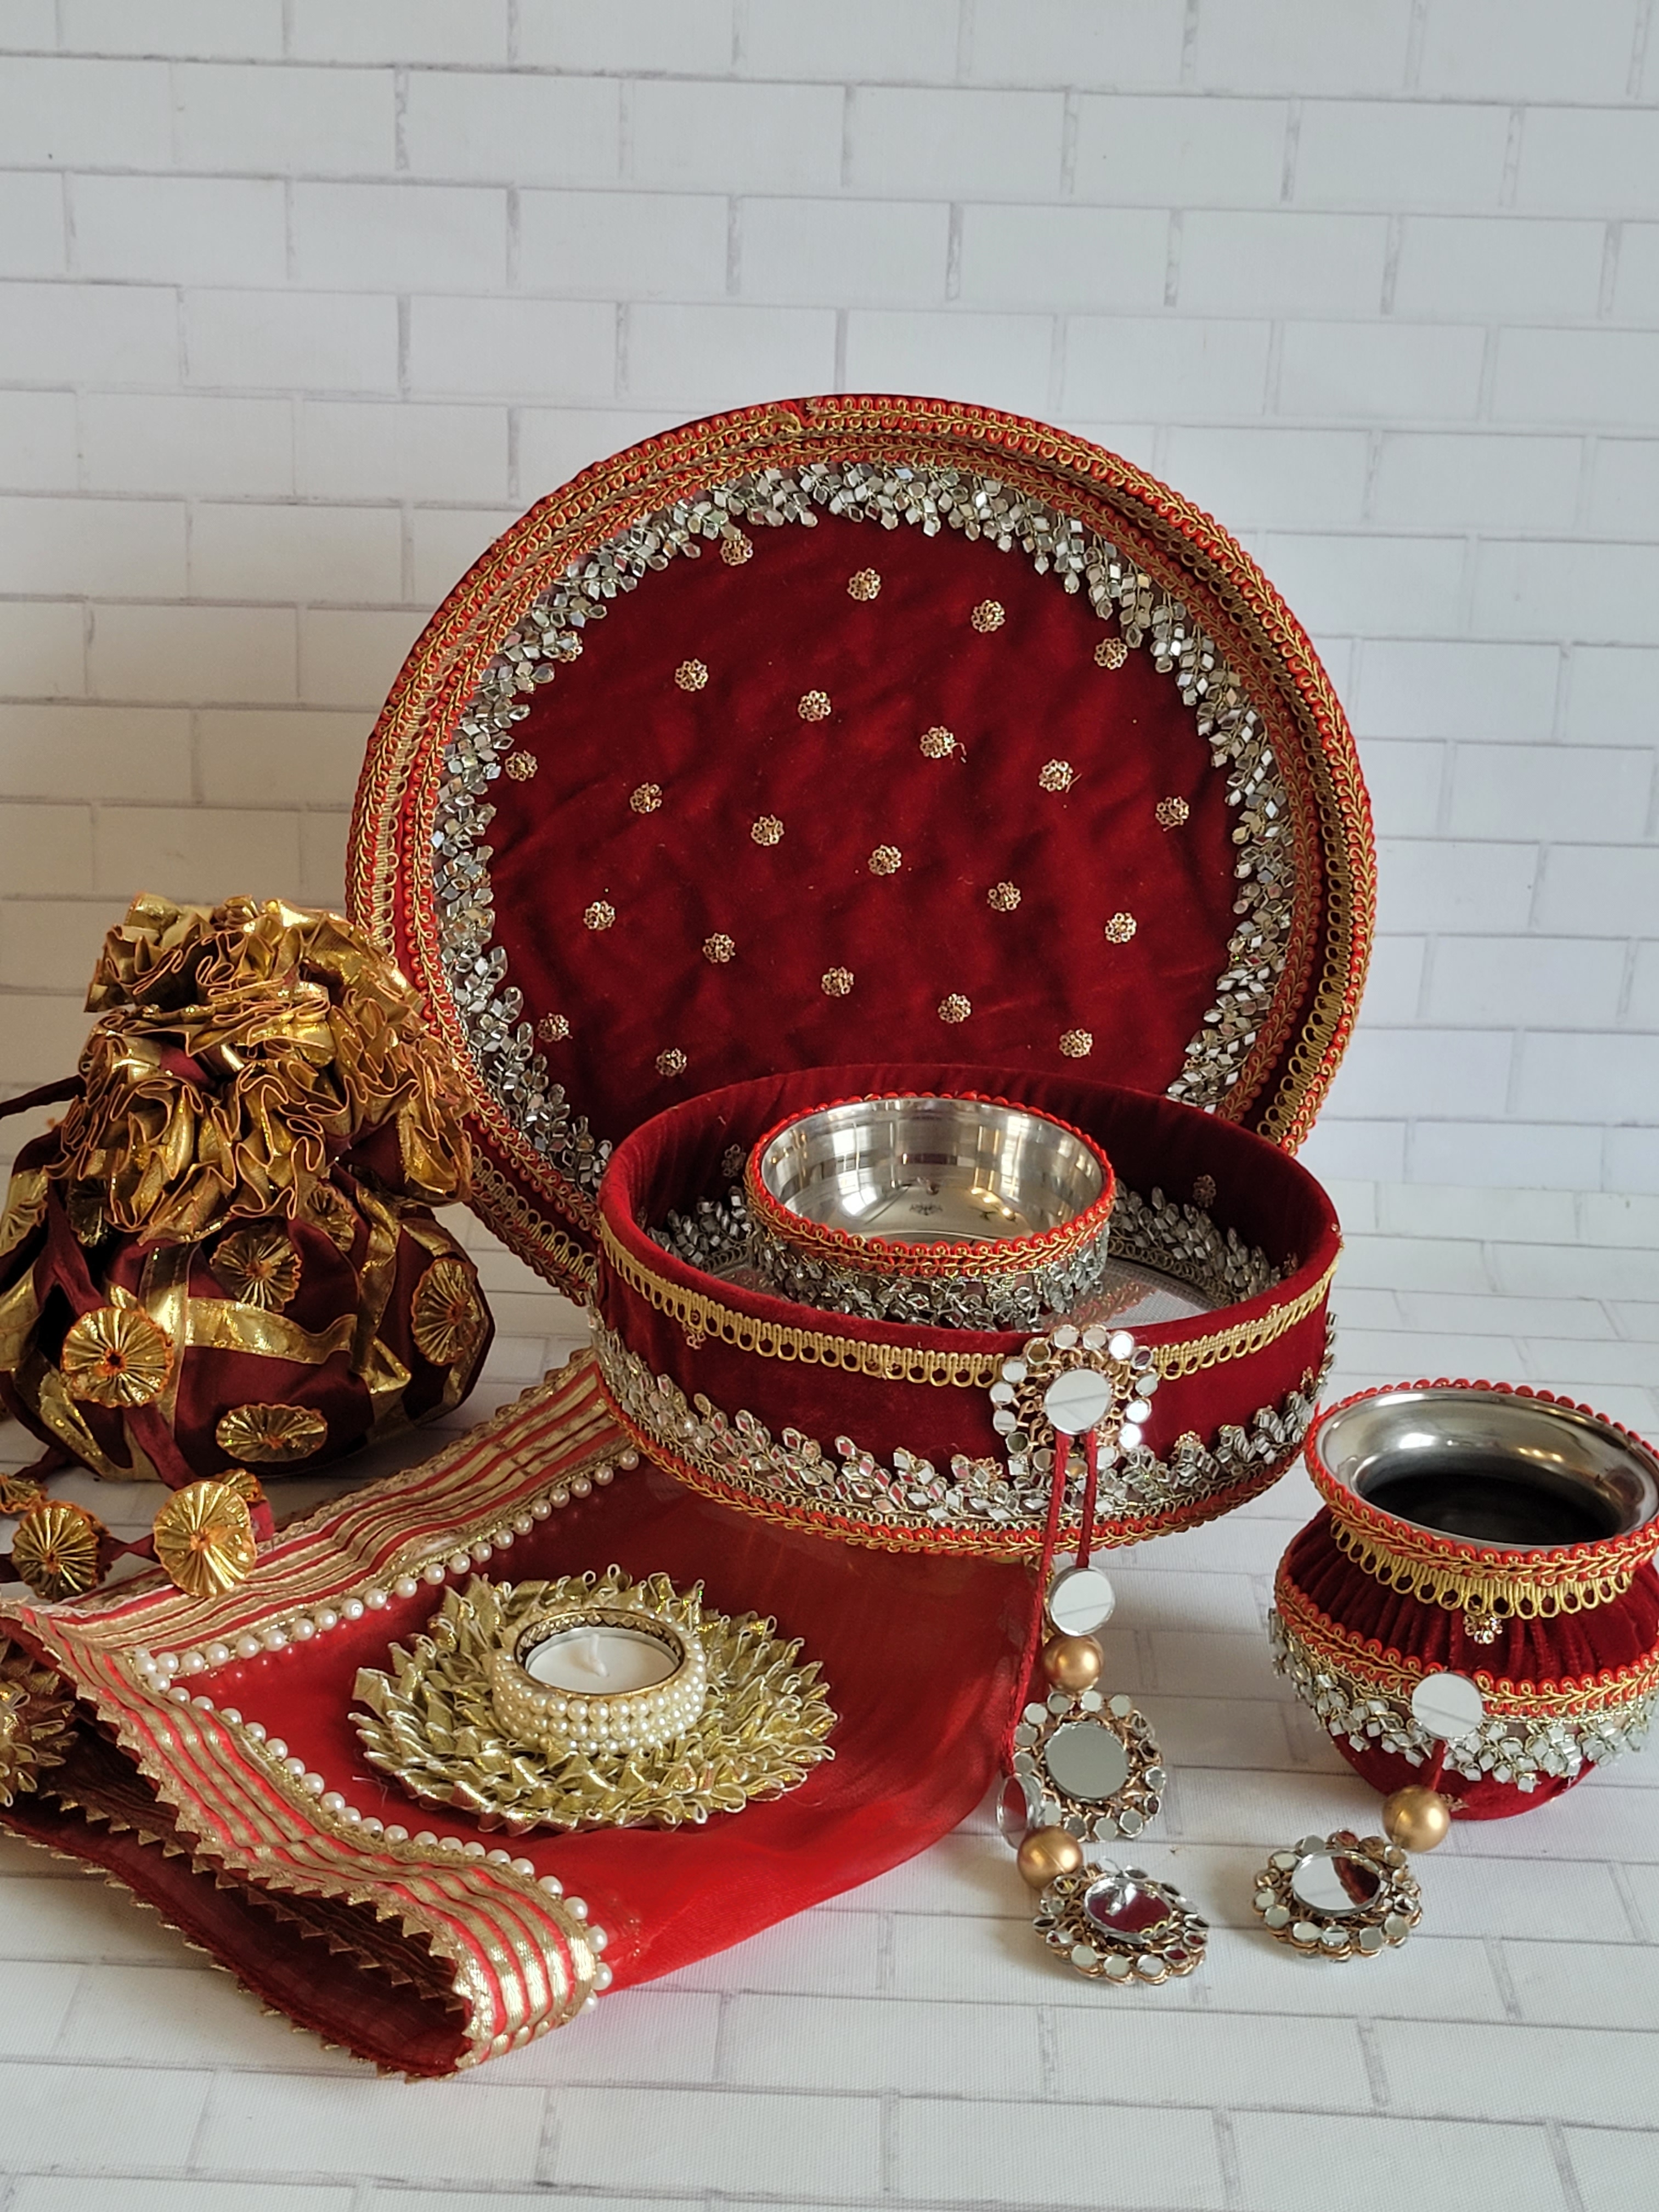 Floral art | Gold & Red Pearl Work Karva Chauth Thali Set (Brocade Fabric) undefined